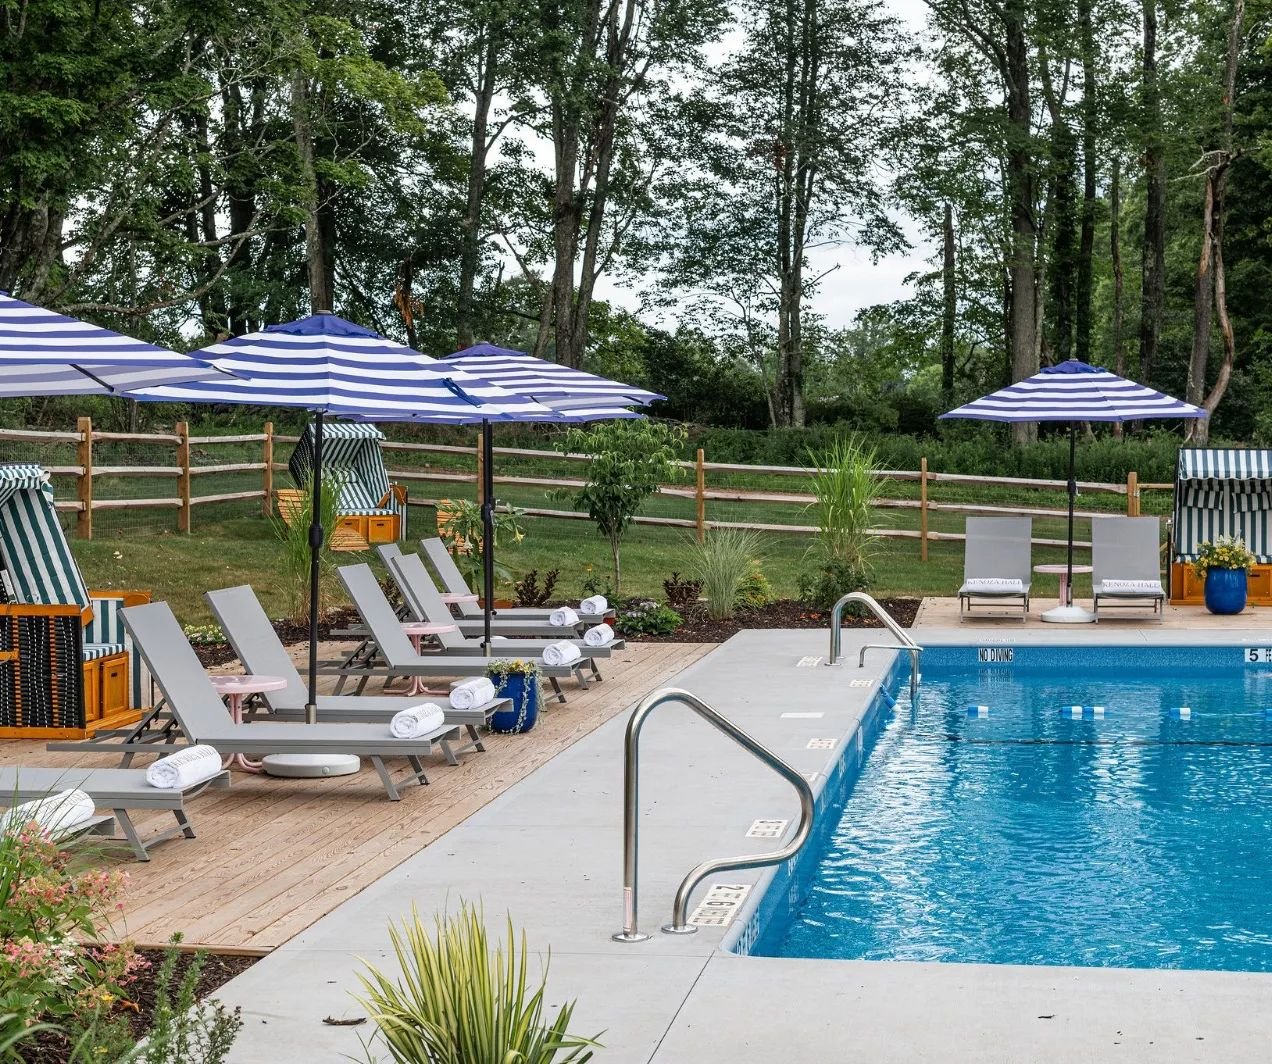 Ah, the sweet anticipation of summer getaways! Plan your Catskills stay today. 

Photo by: @lwrncbrn 

#kenozahall #catskills #catskillshotel #pool #summer #upstateny